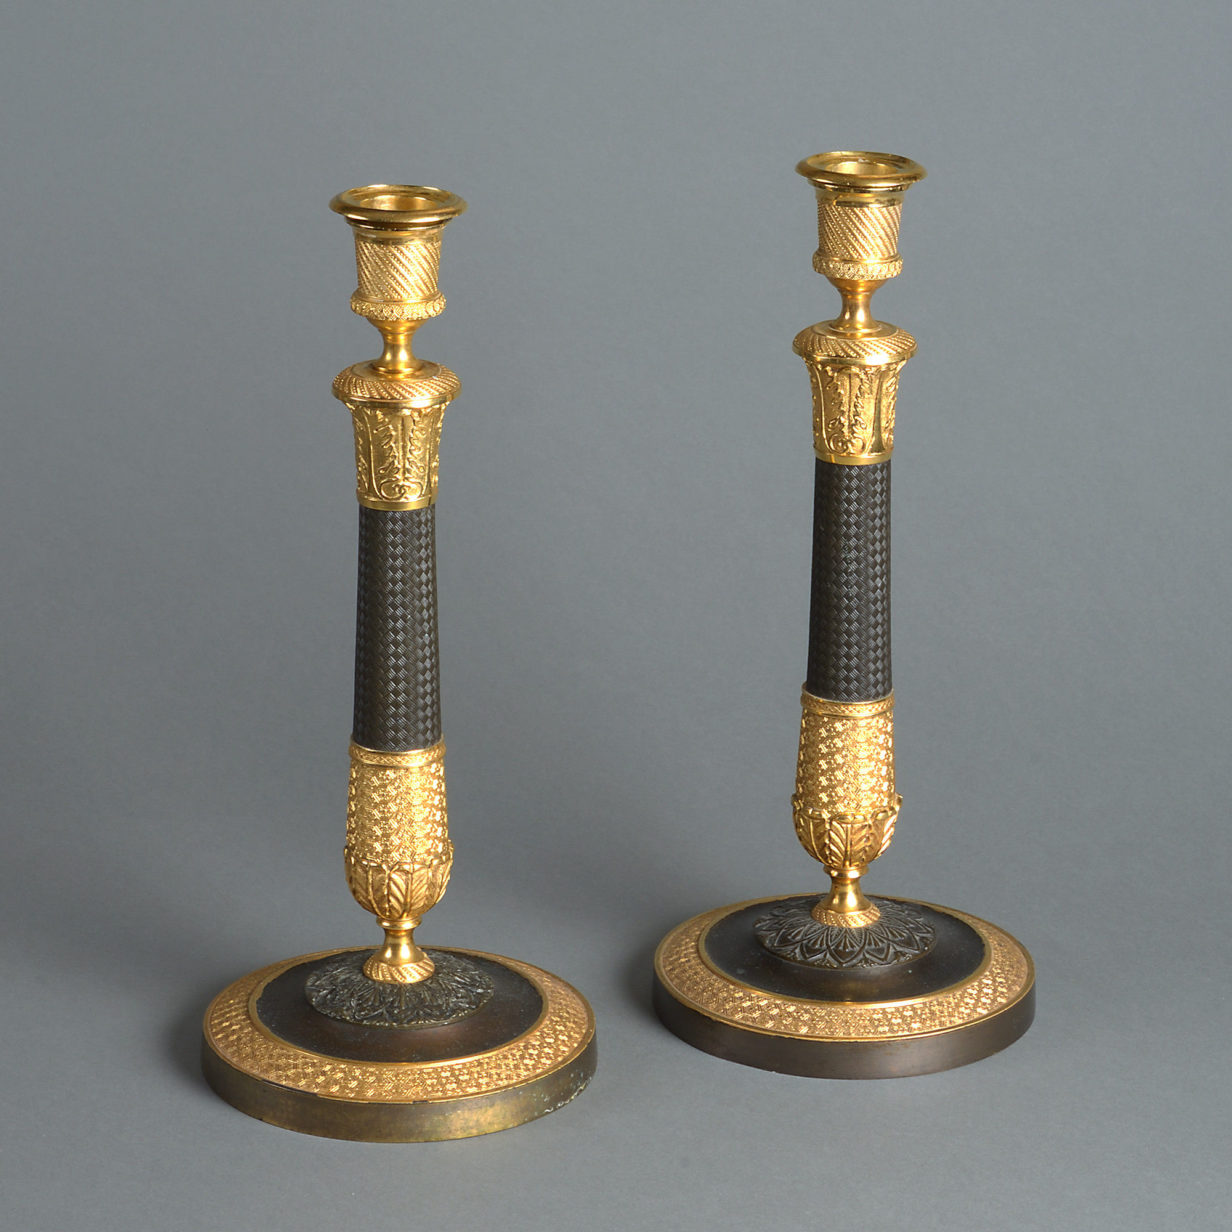 A pair of early 19th century charles x ormolu and bronze candelabra